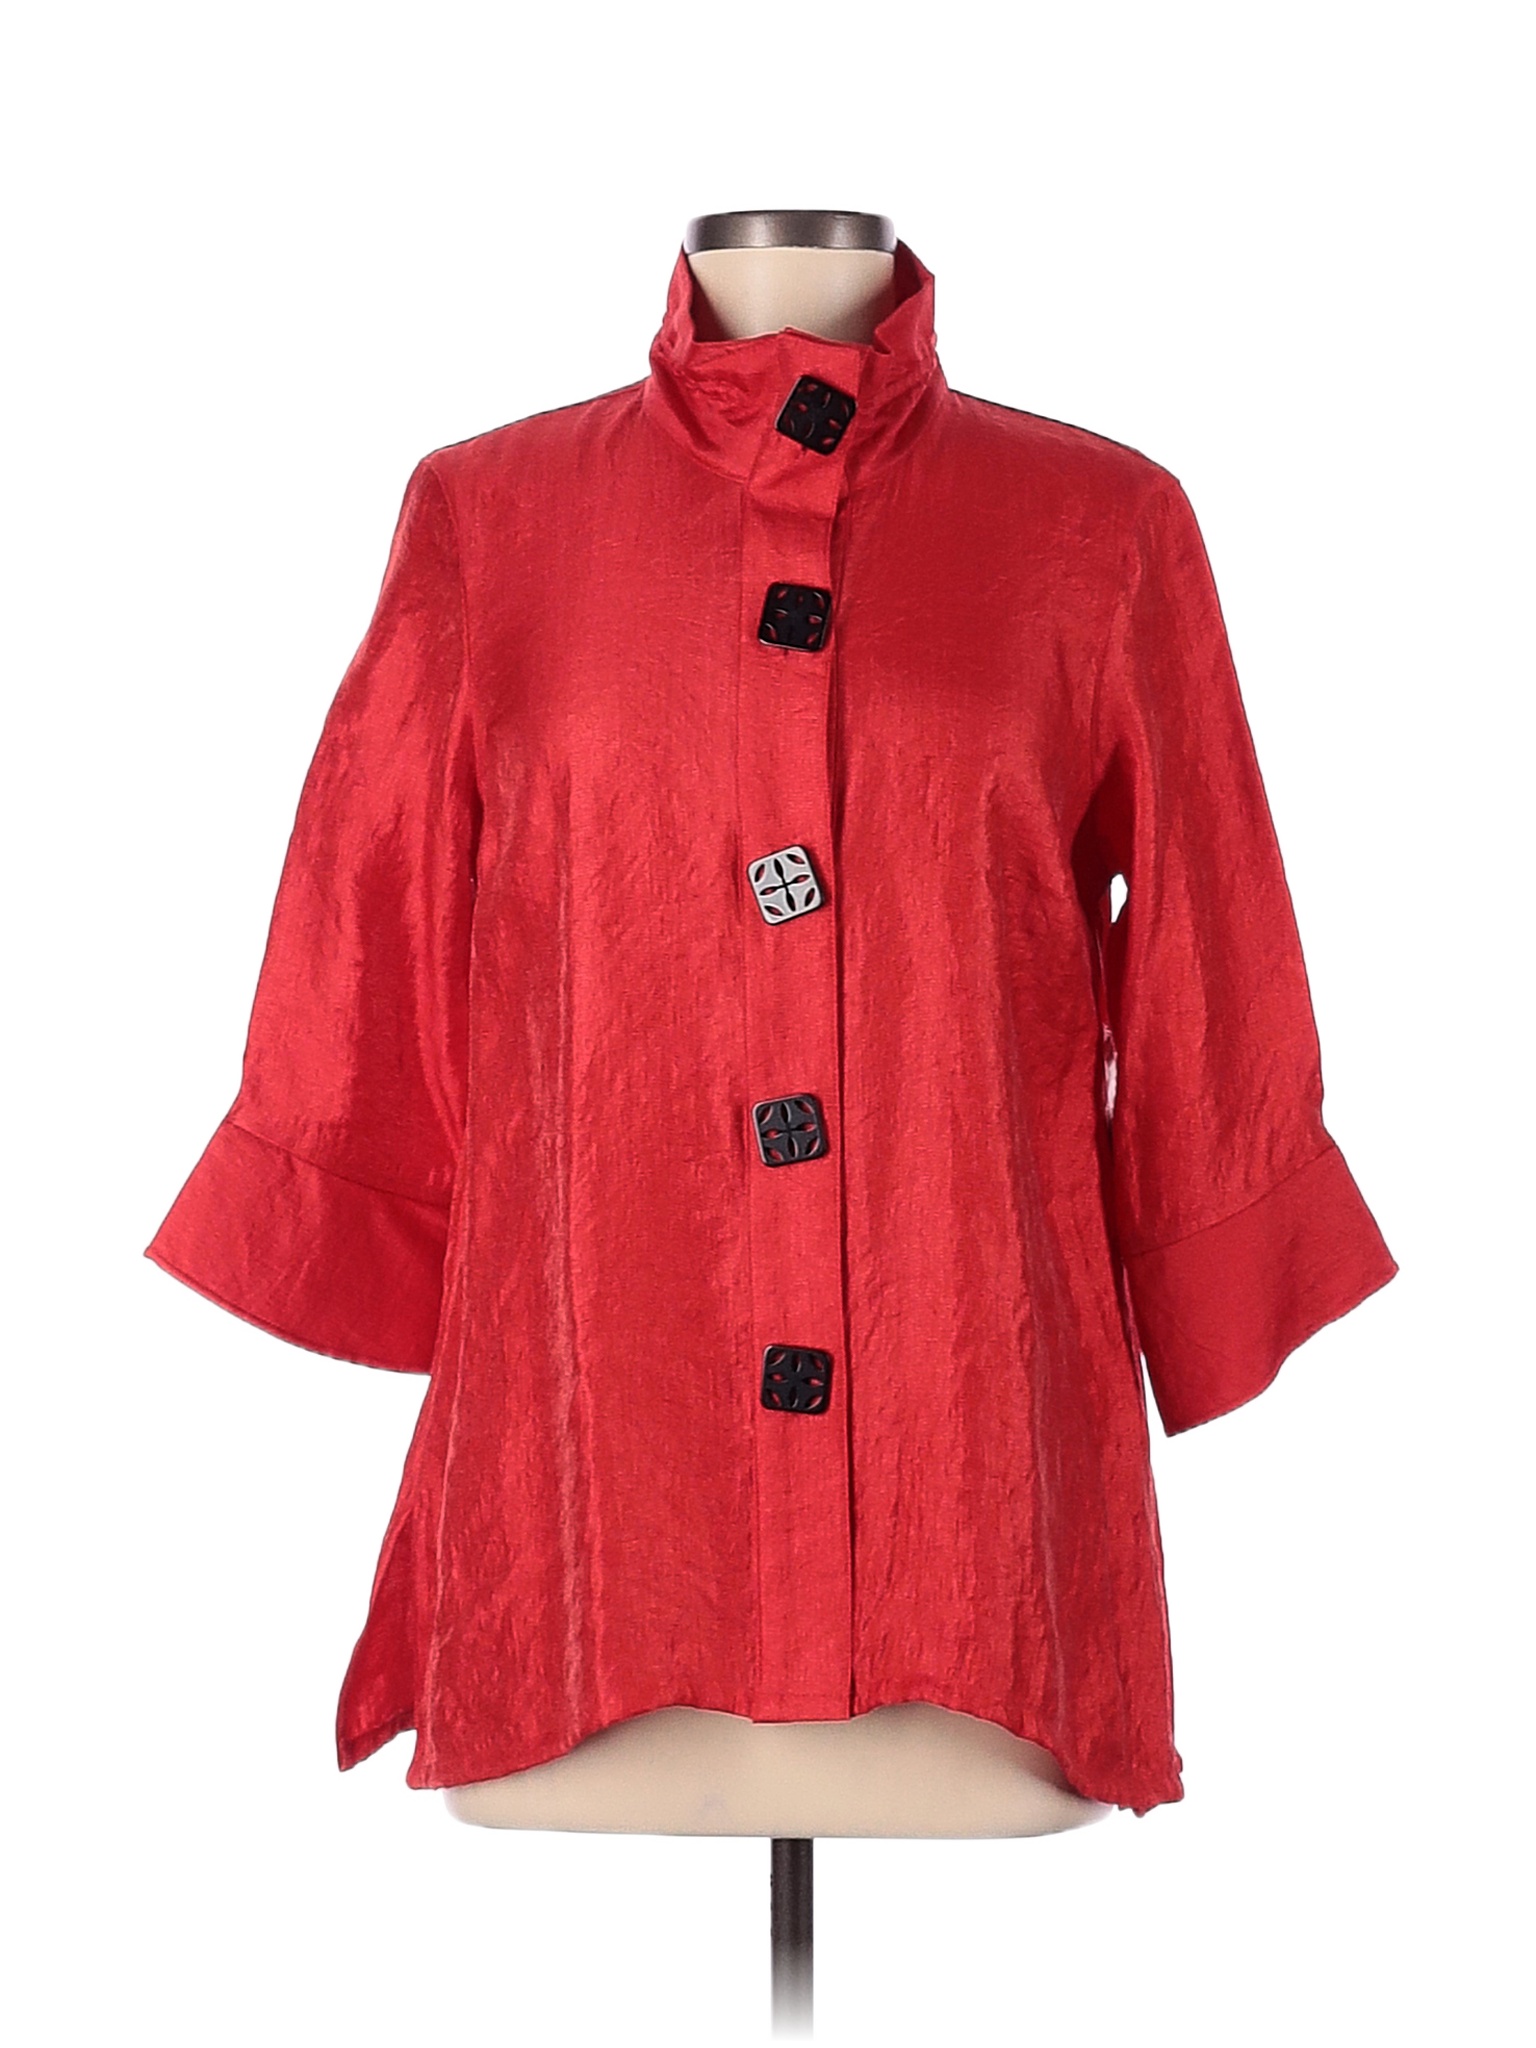 Ali Miles Solid Colored Red Jacket Size M (Petite) - 64% off | thredUP